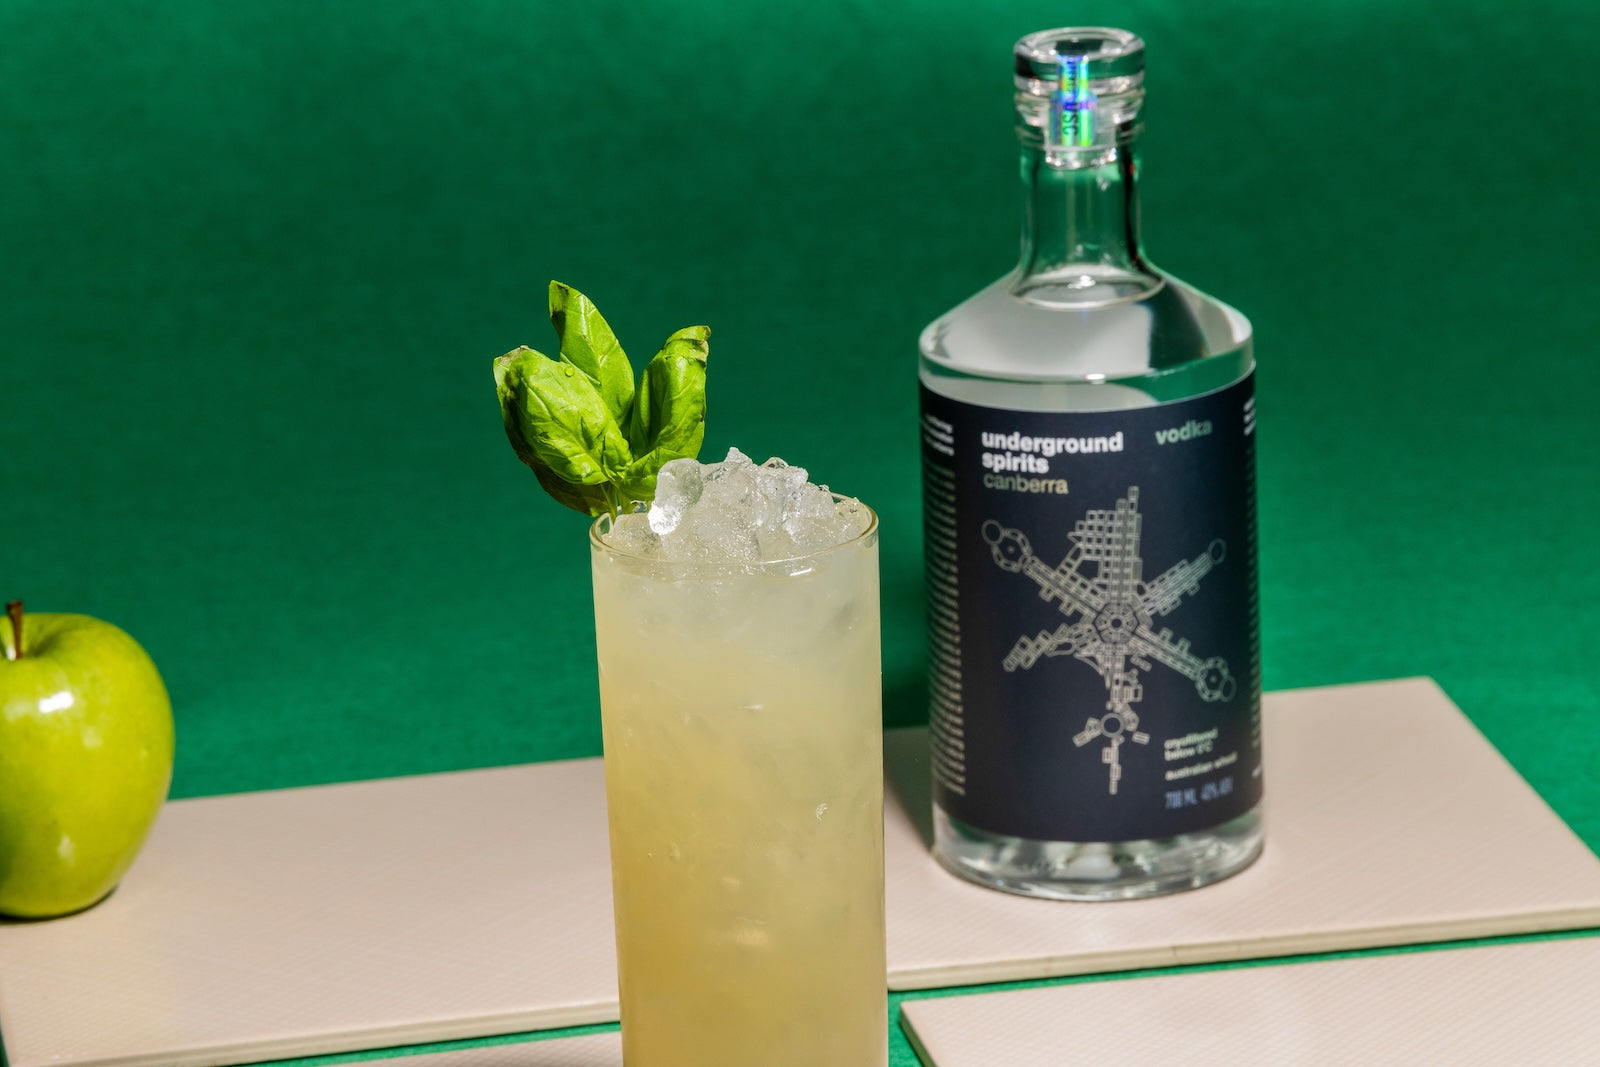 A bottle of Underground Spirits Canberra Vodka, accompanied by a refreshing cocktail garnished with basil leaves and ice, sits elegantly next to a green apple against a vibrant green background, emphasising the natural, high-quality ingredients used by Underground Spirits